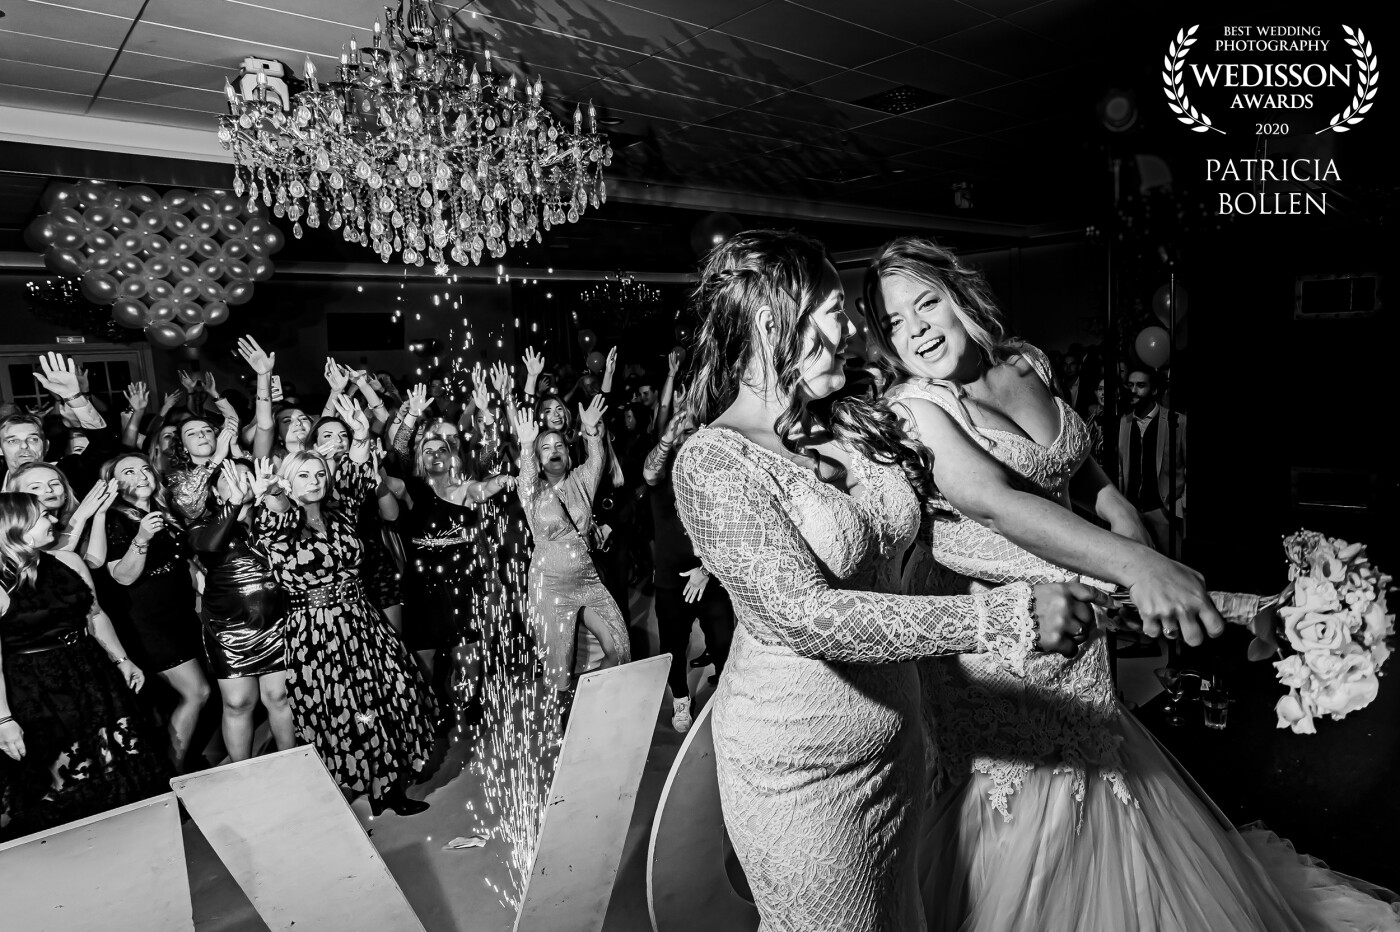 I love party pics. I made this one January 2020, before COVID-19 blocked the parties. This wedding couple of two girls threw their flowers to the unmarried girls at the party. In this tradition, the lucky one who gets the flowers will be the next bride!